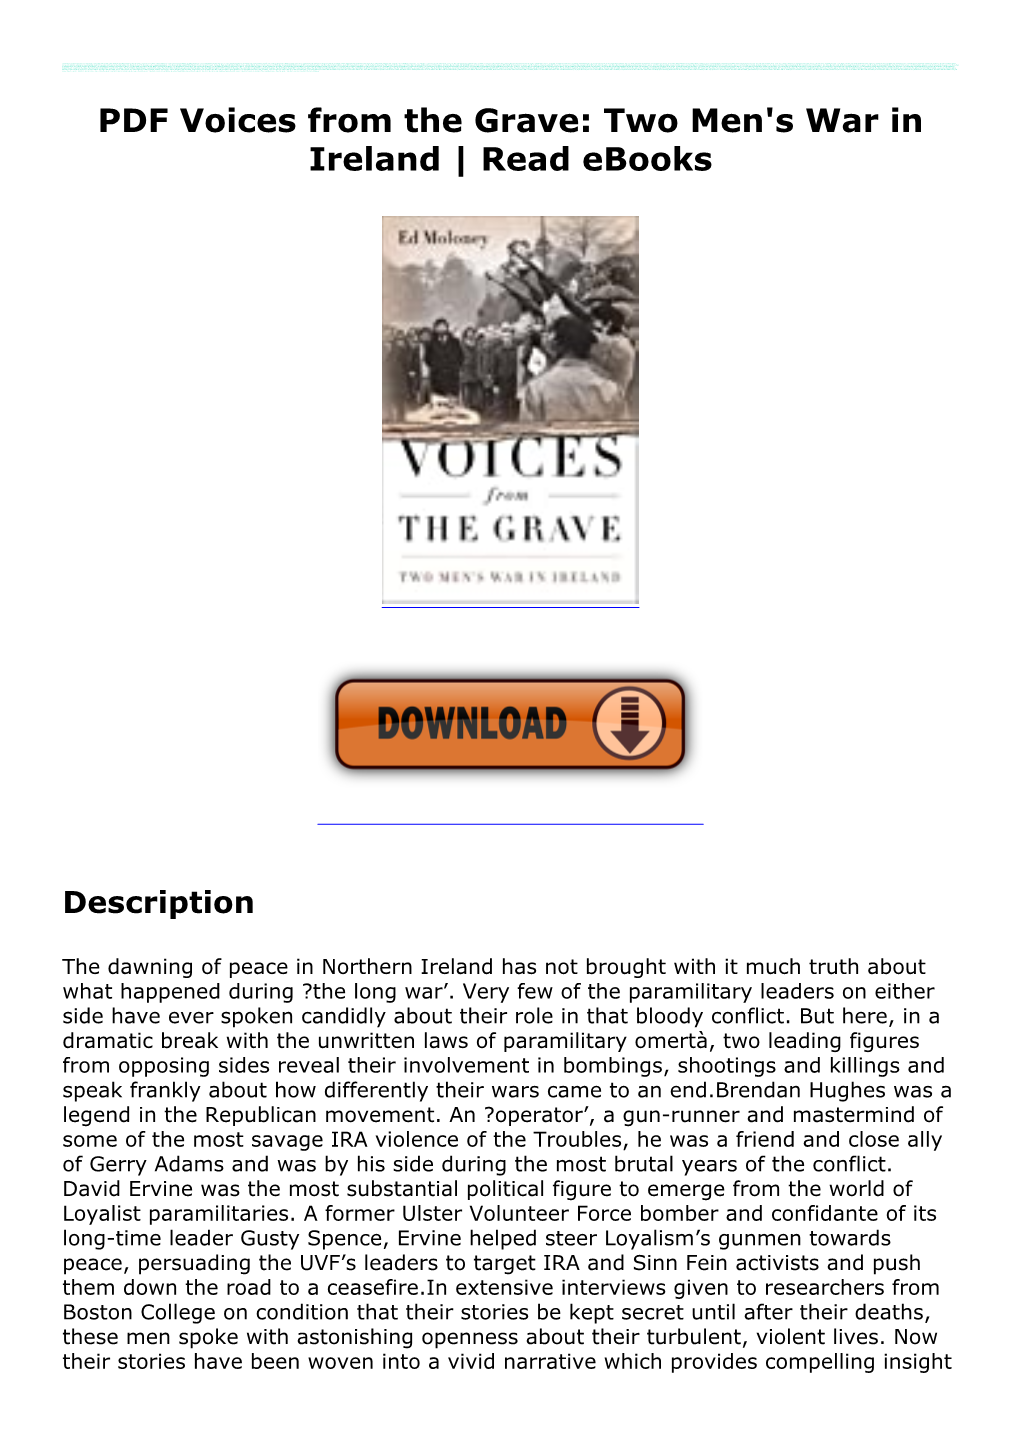 PDF Voices from the Grave: Two Men's War in Ireland